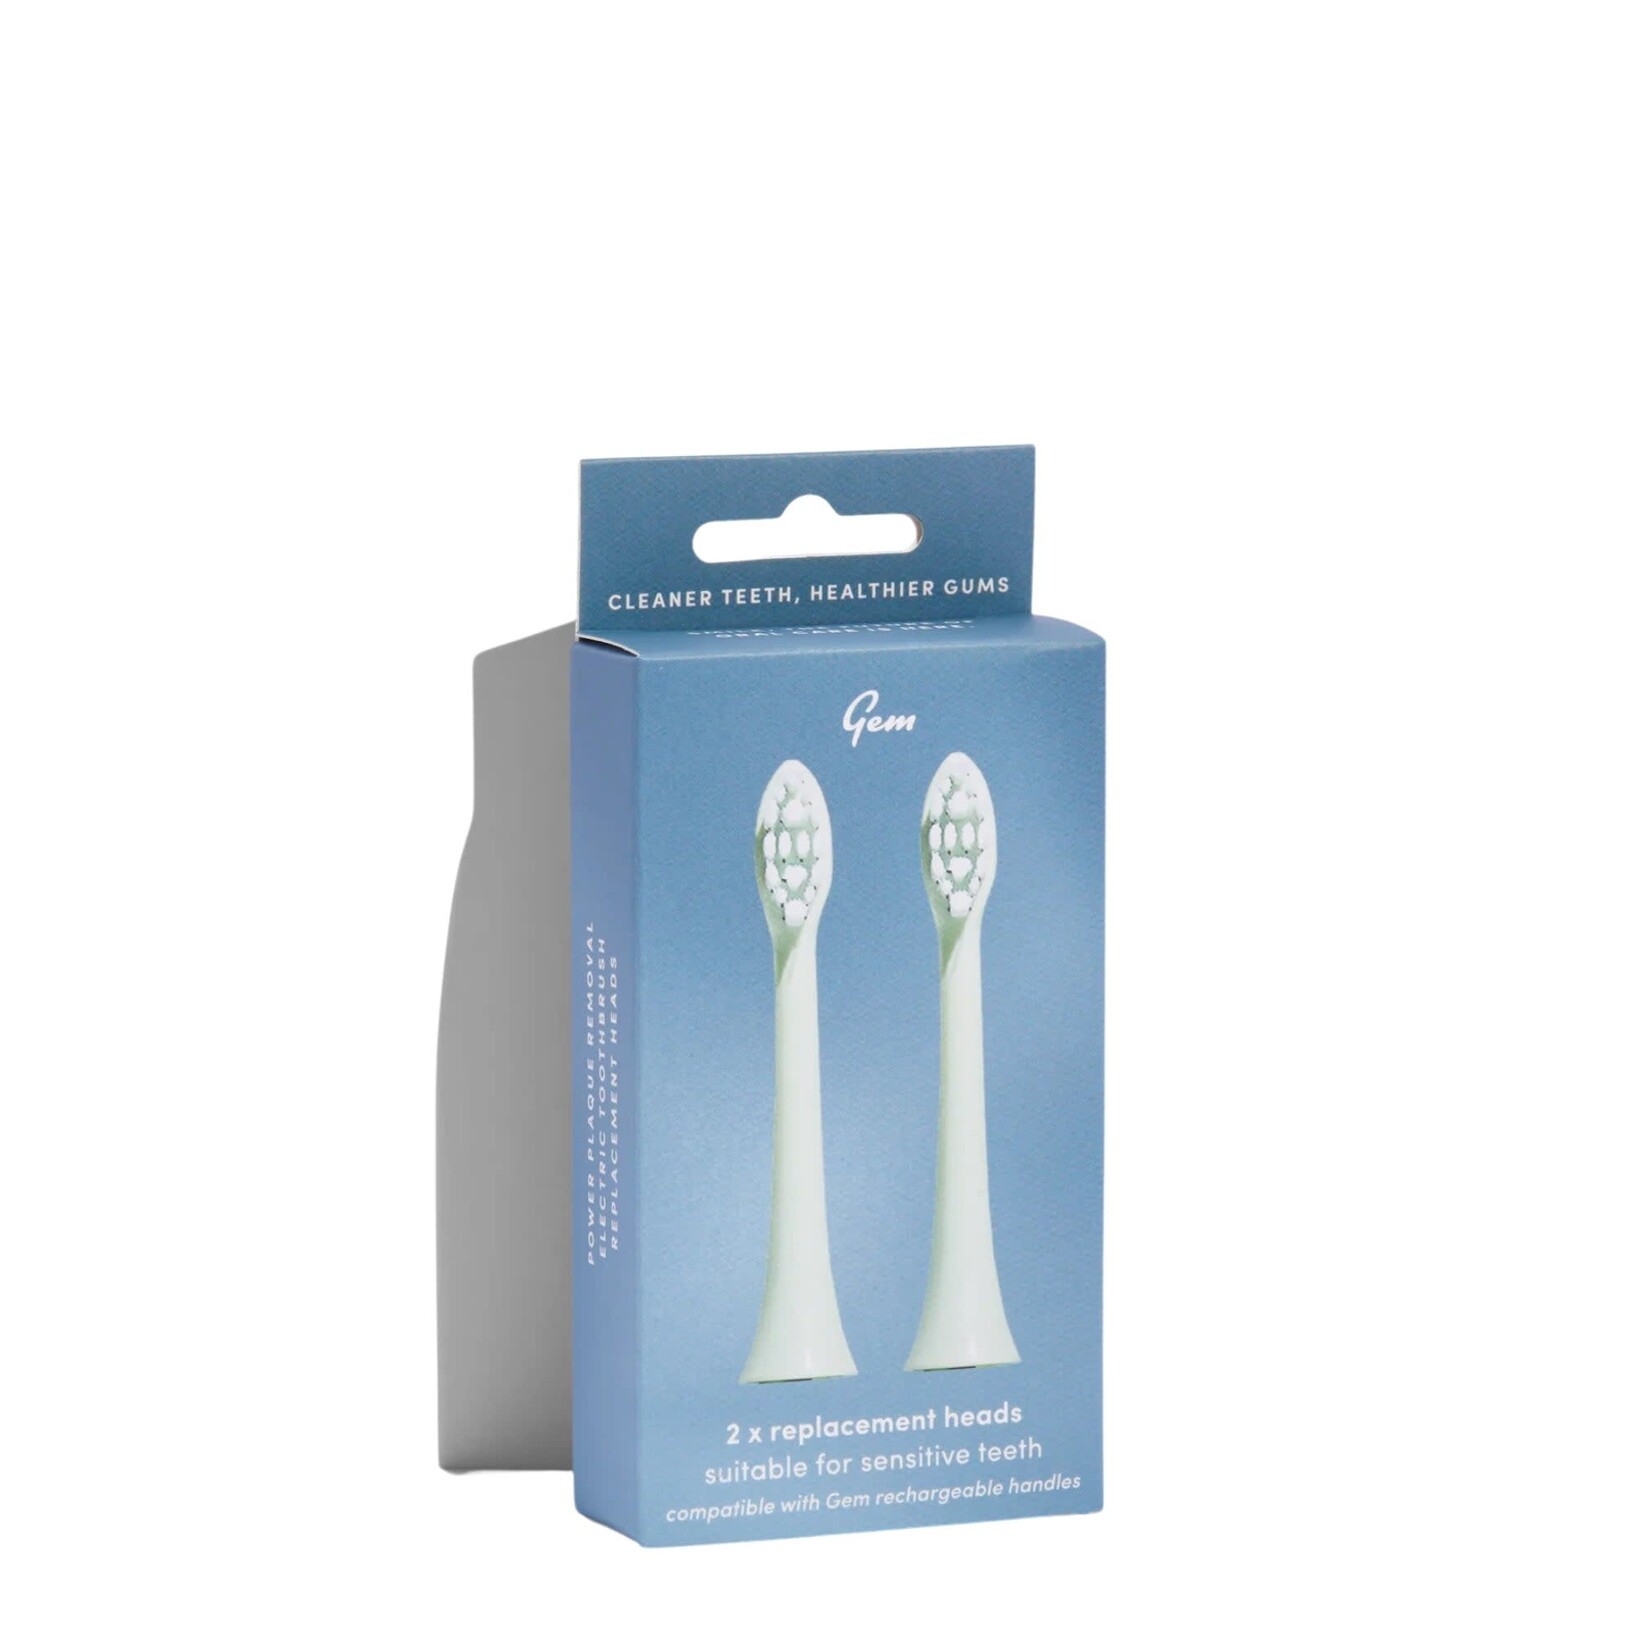 GEM Gem Electric Toothbrush Replacement Heads Mint Green 2 pack